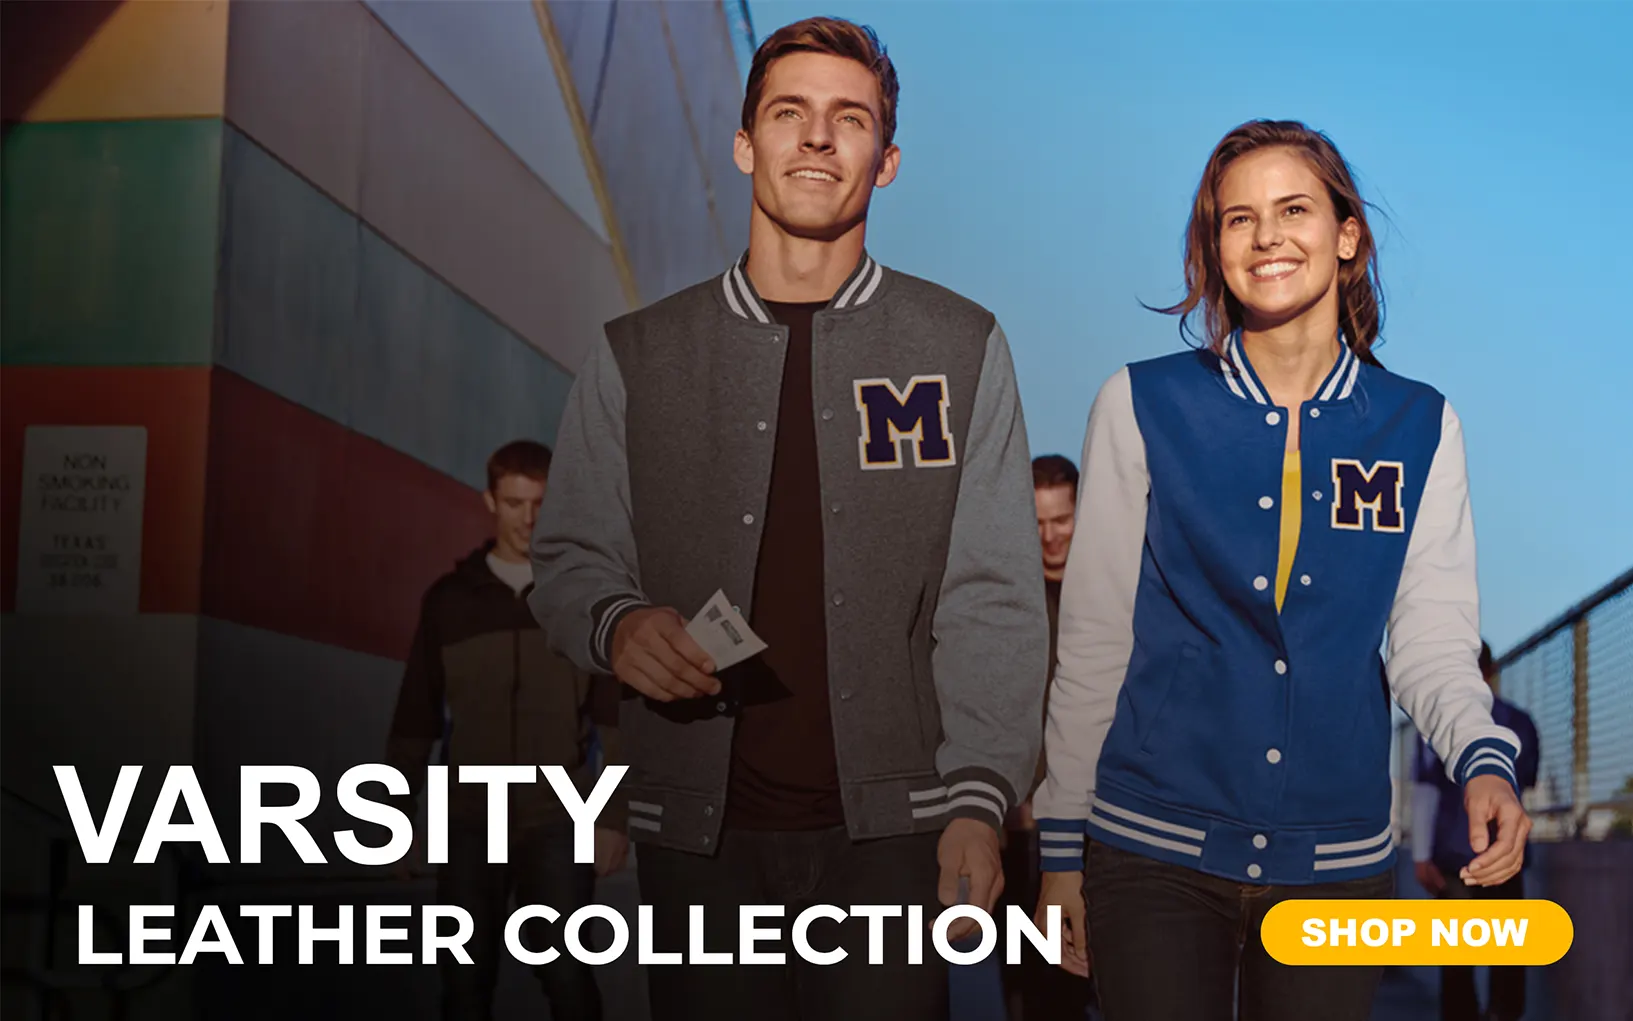 Varsity Leather Collection